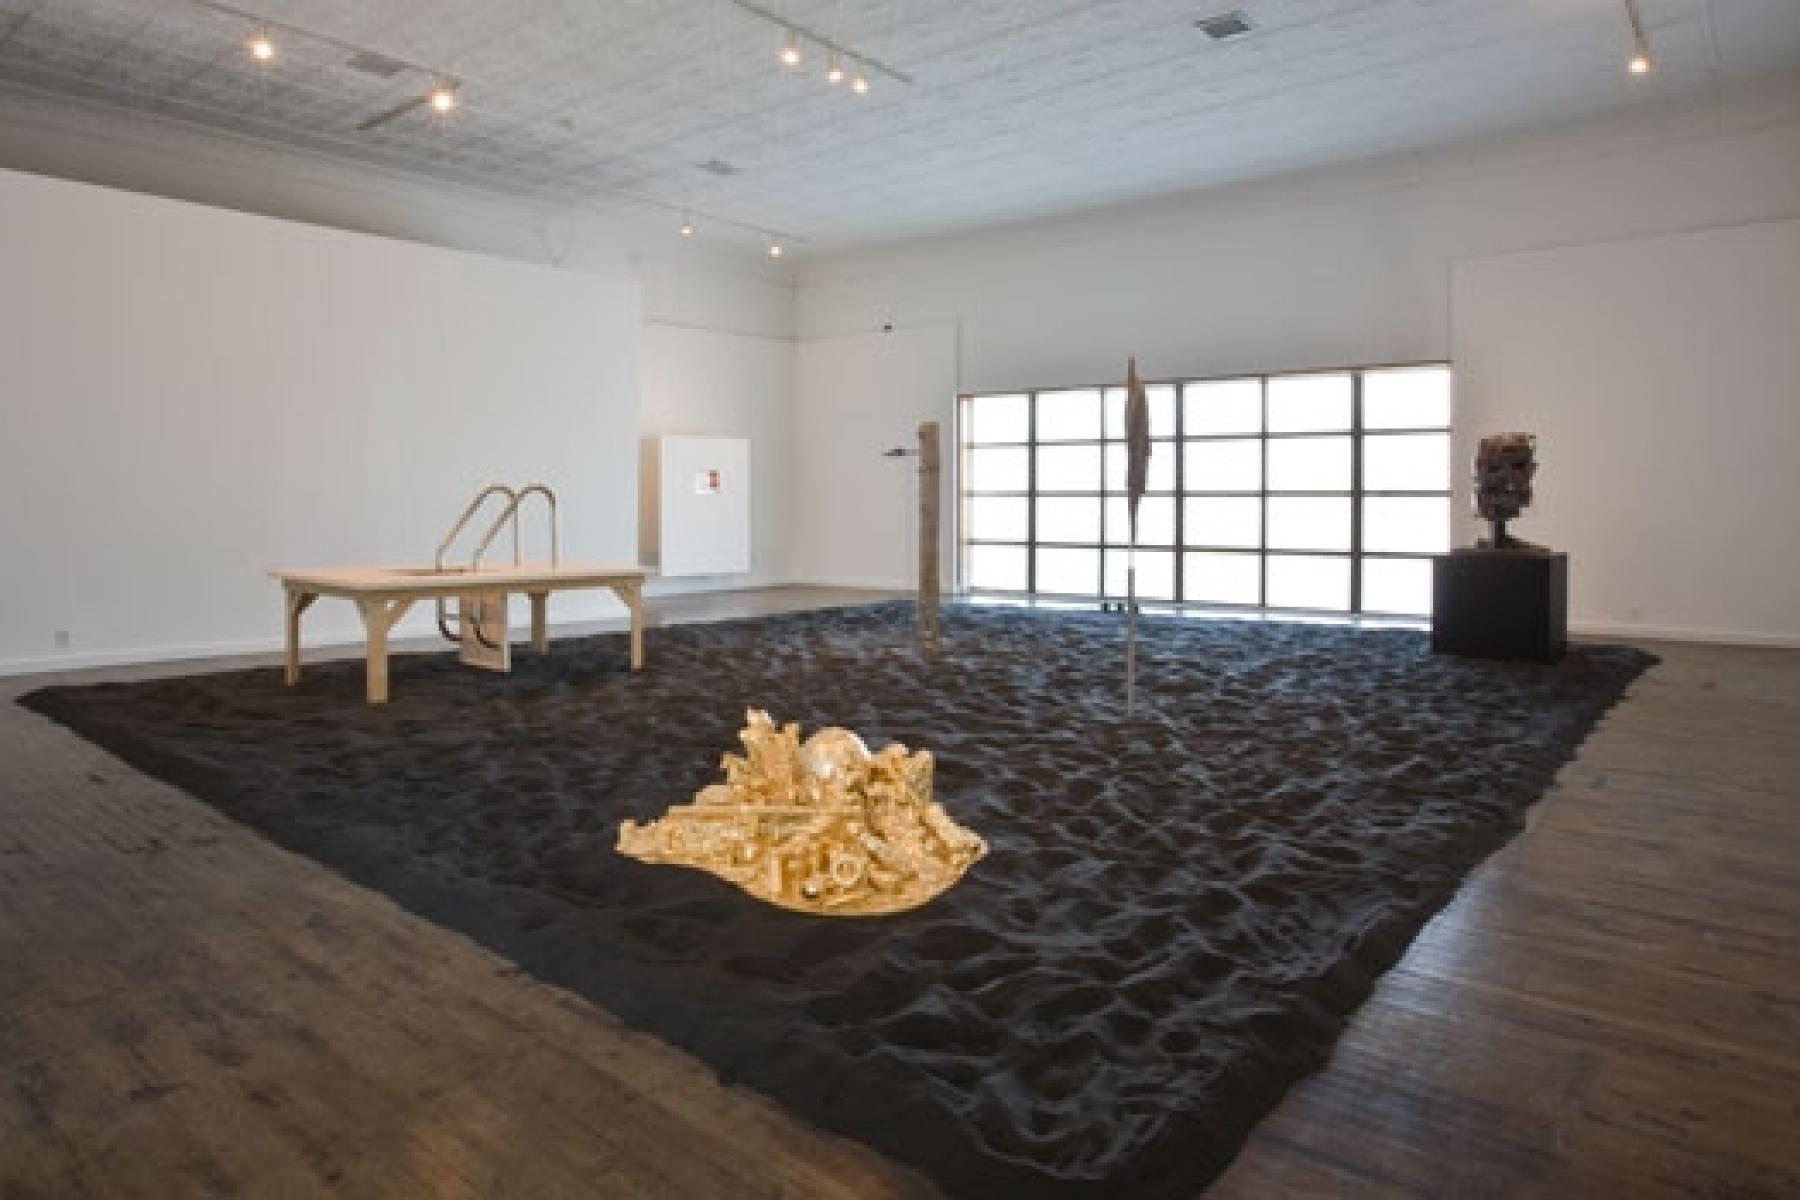 Installation view, North Gallery with works by (from left to right) Joan Wallace, John Miller, Carol Bove, Haim Steinbach, Barry X Vall, and Huma Bhabha.